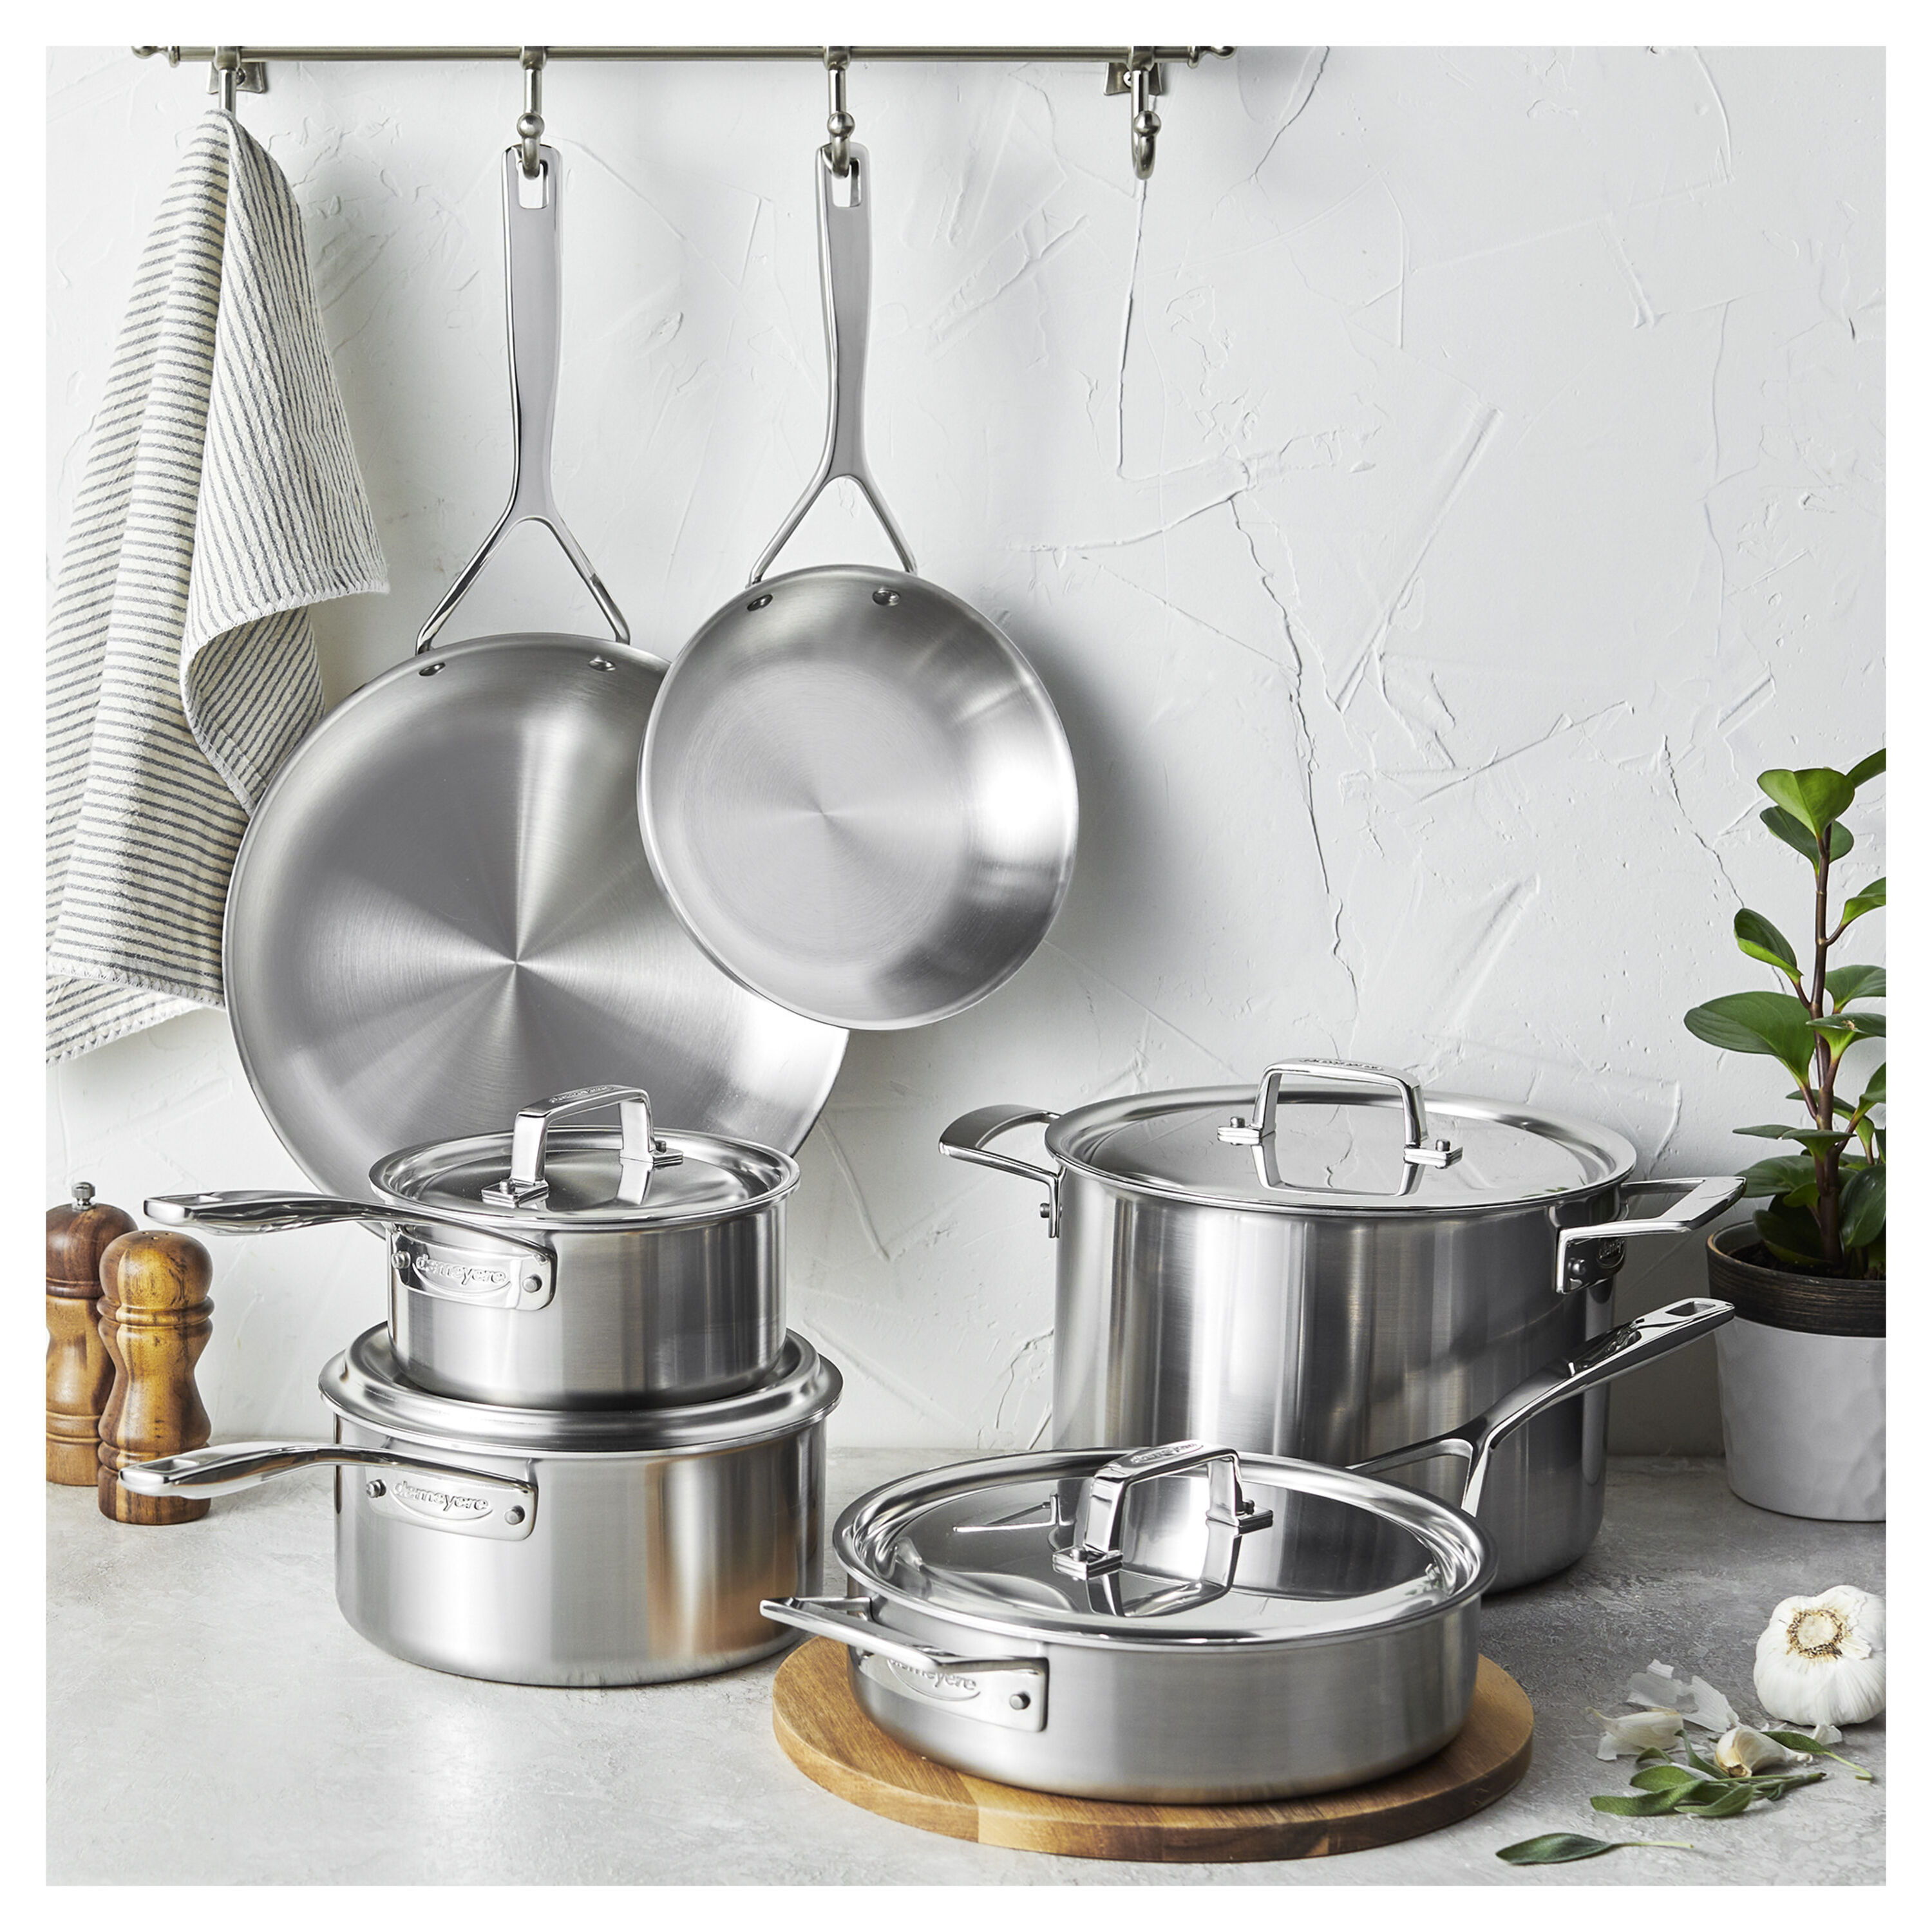 Demeyere Cookware Set 5-Ply Plus Stainless Steel 10-Piece